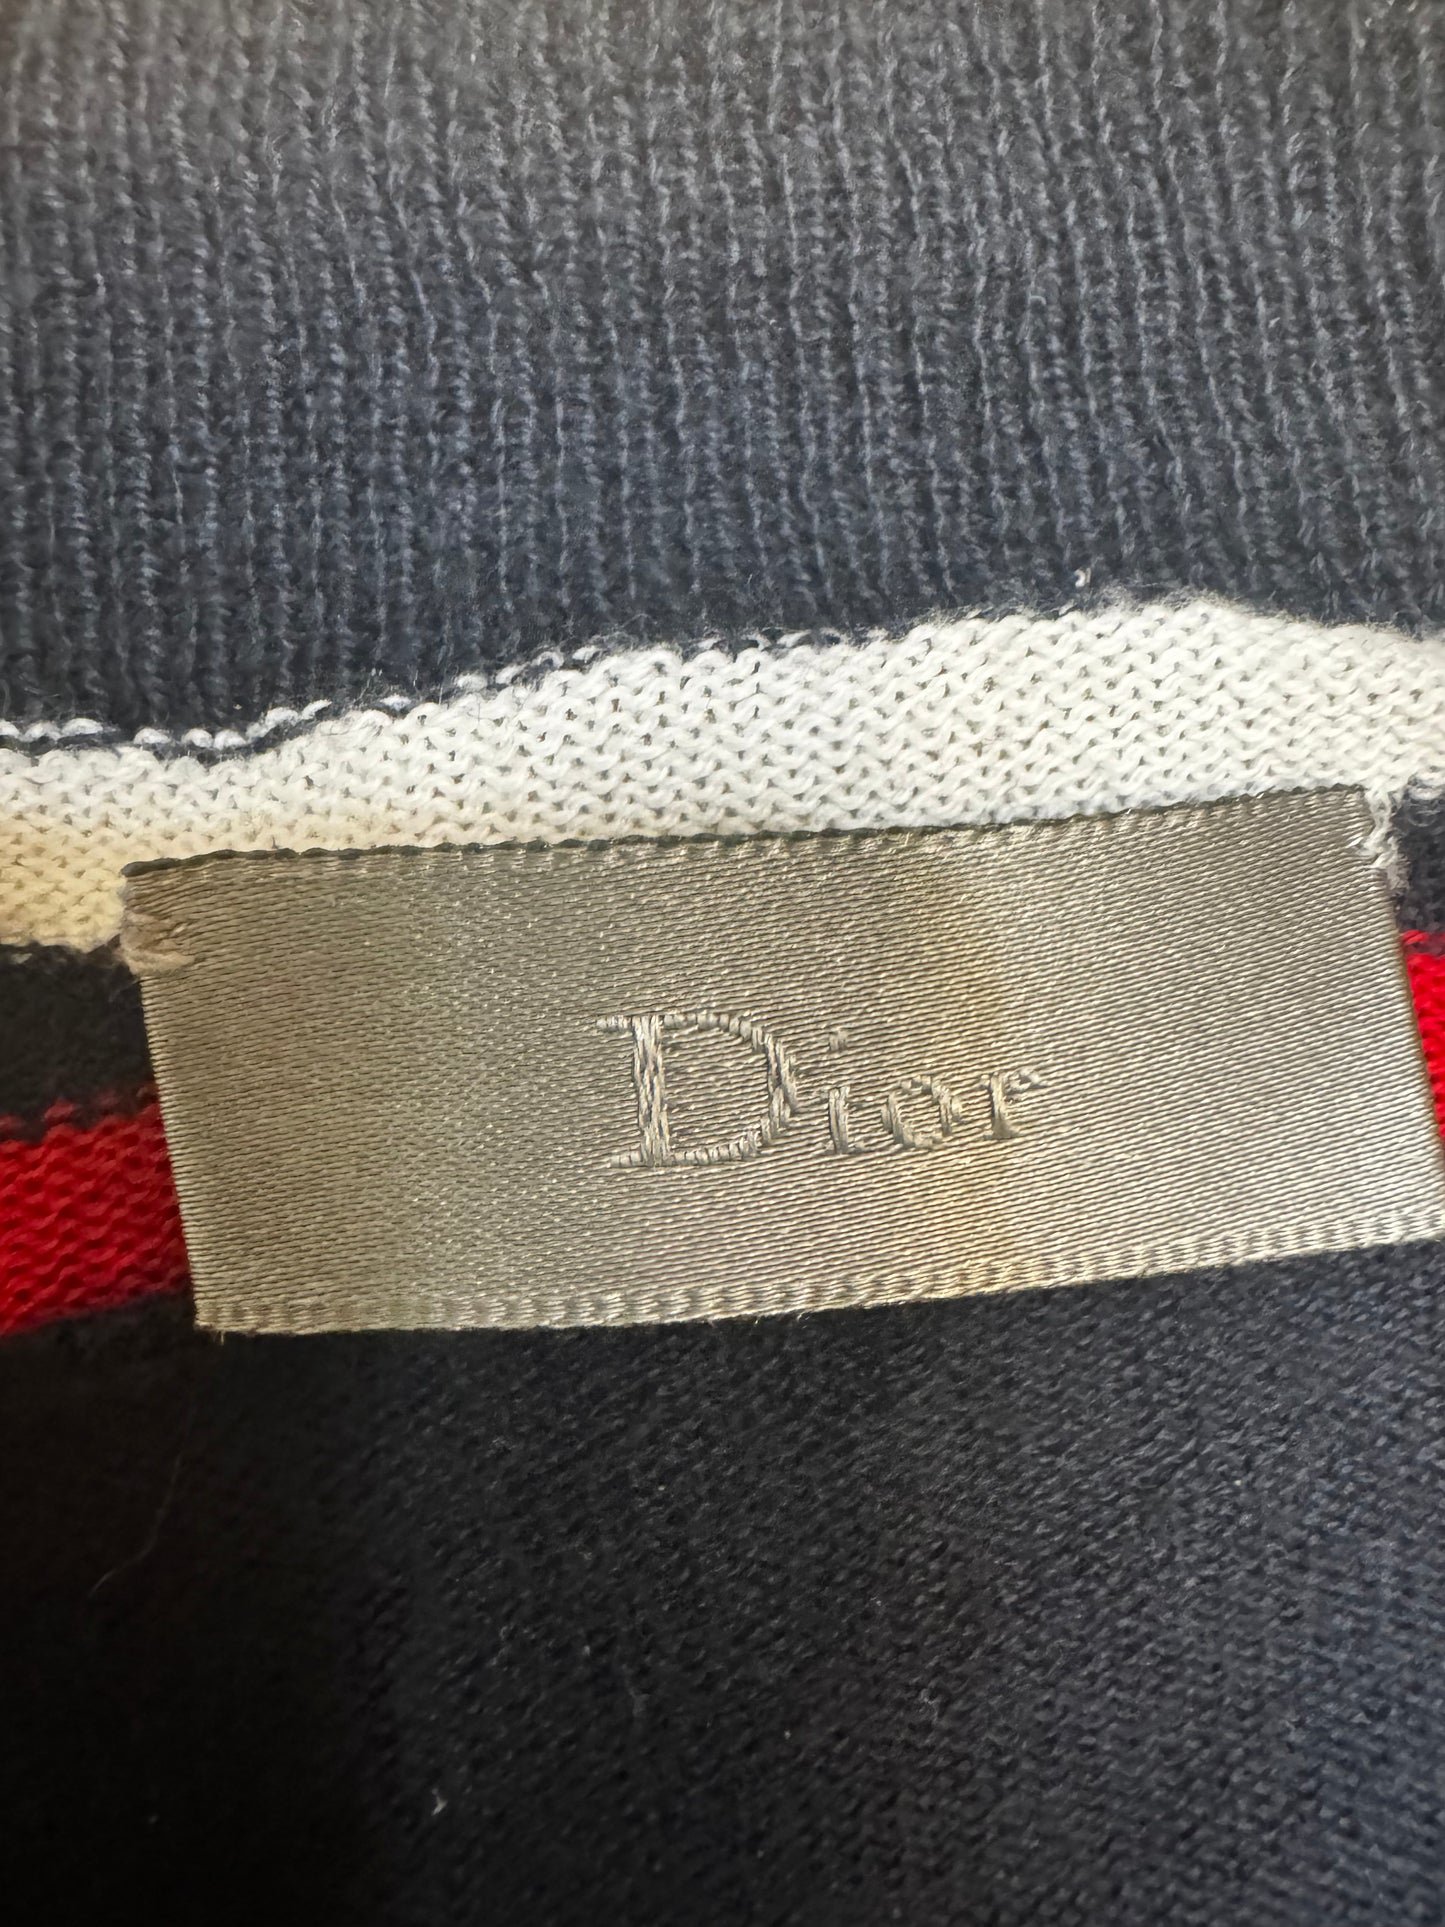 Dior Homme by Hedi Slimane SS 2006 knit sweater